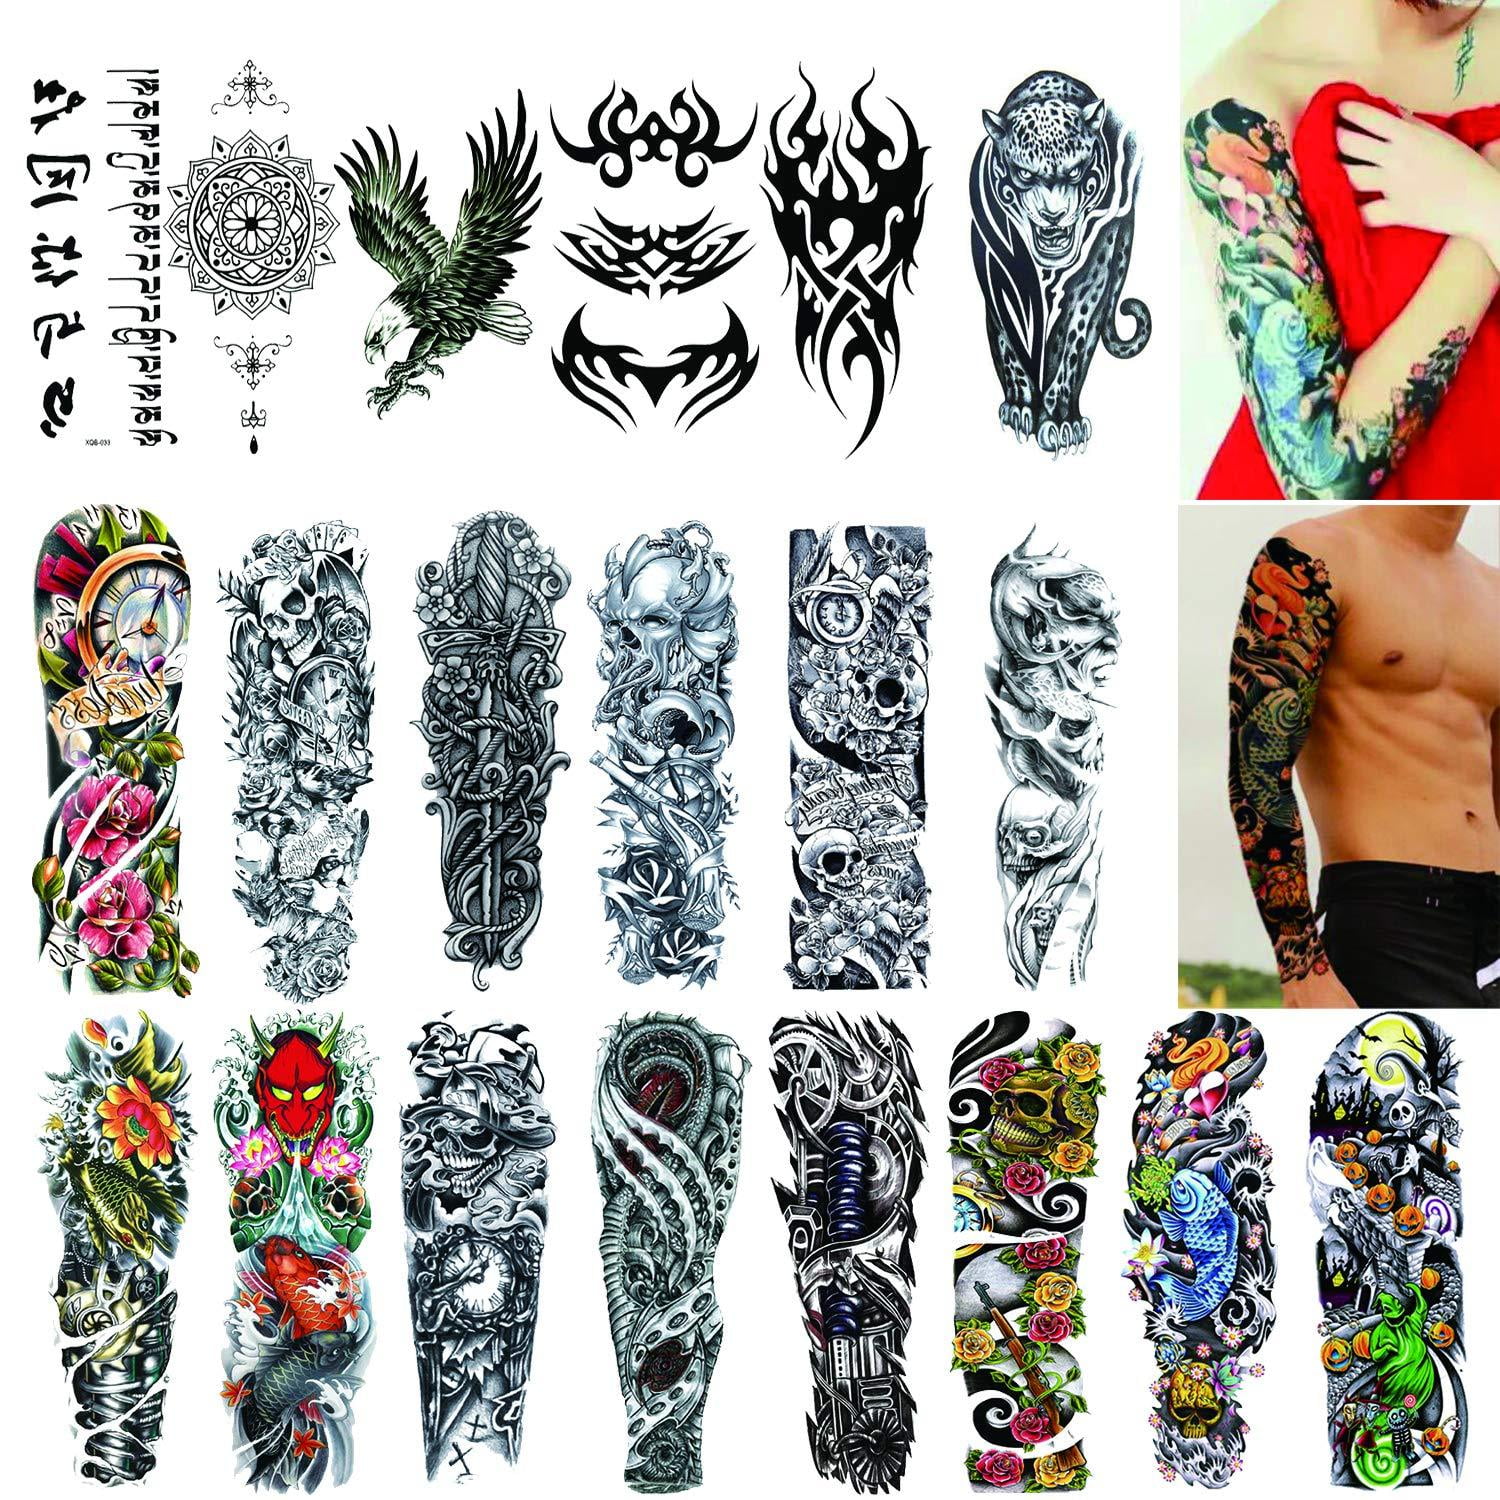 full-arm-temporary-tattoos-20-sheets-tattoo-sleeves-for-men-and-women-waterproof-fashion